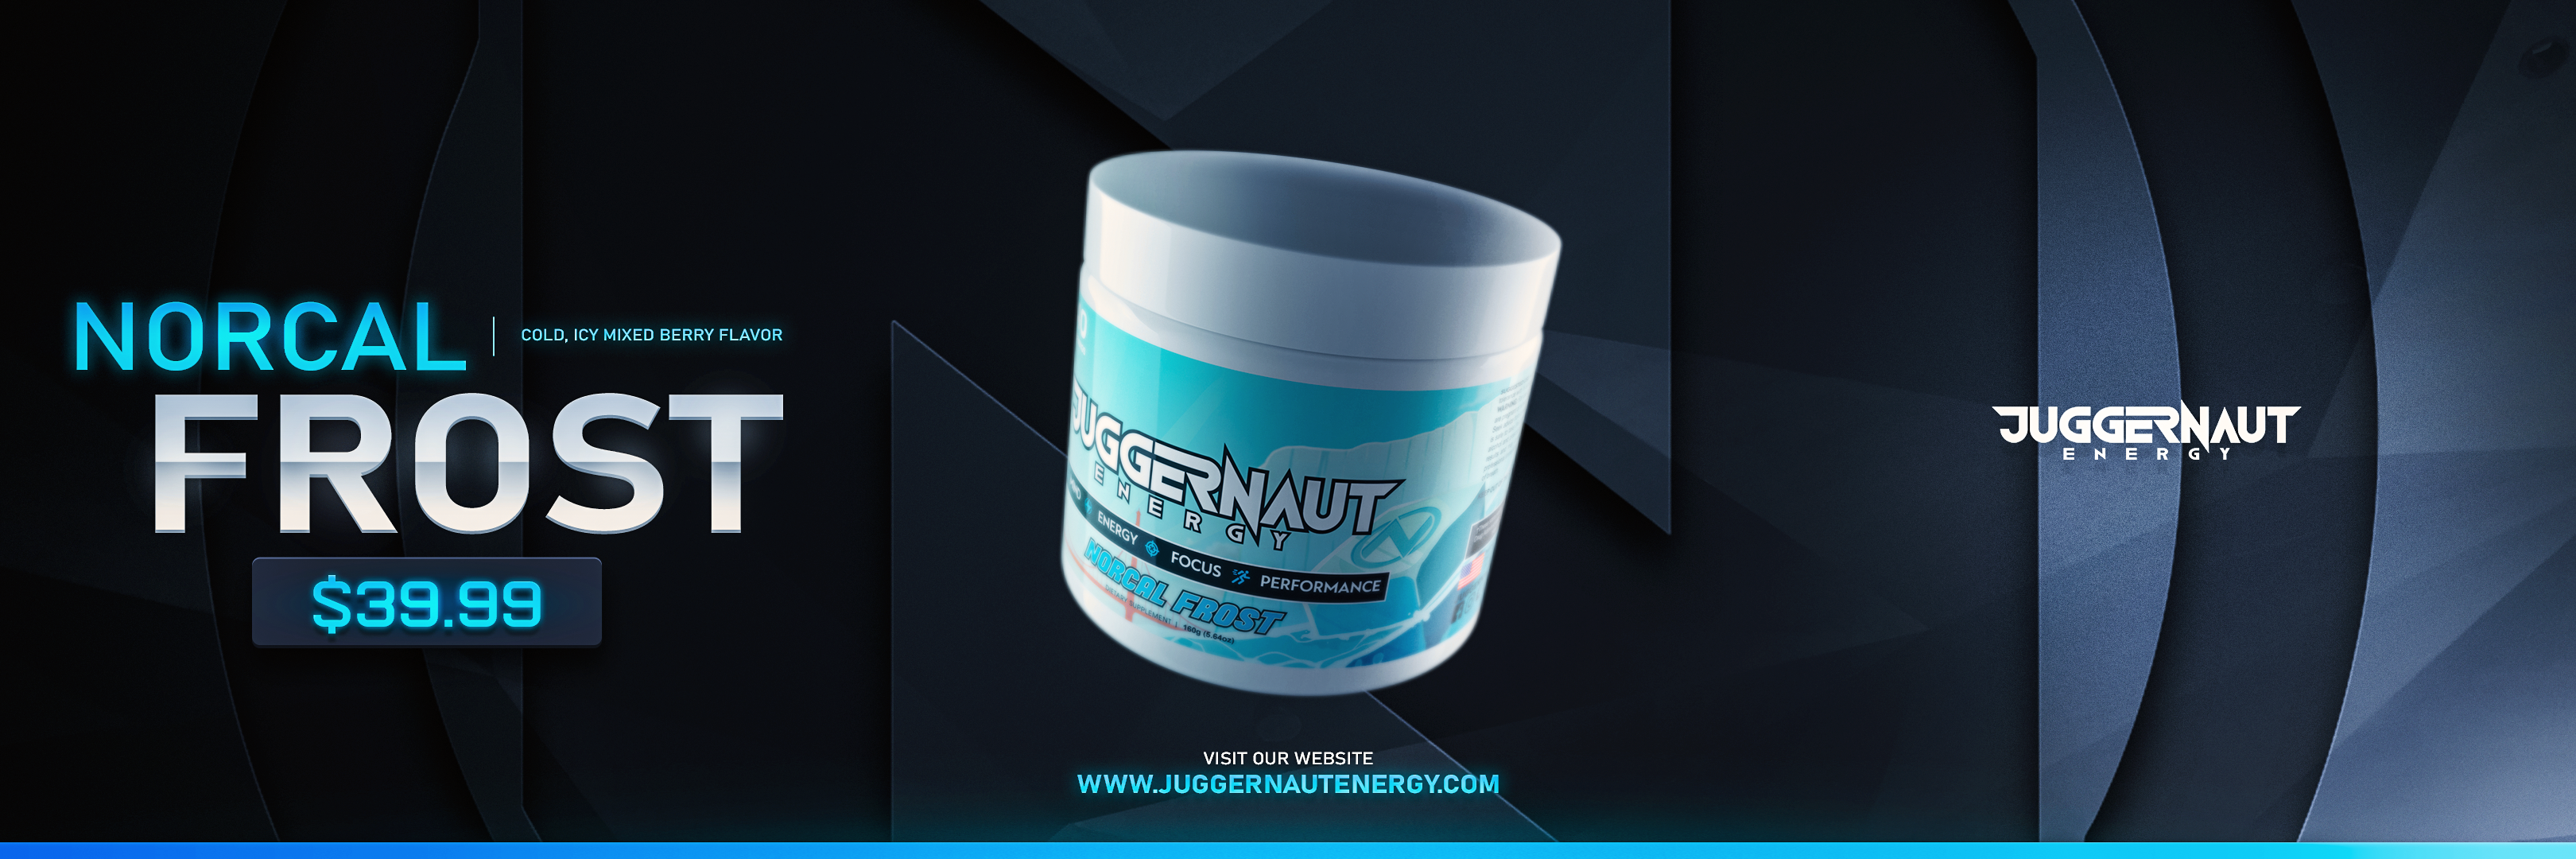 JUGGERNAUT ENERGY AND NORCAL ESPORTS LAUNCH NEW NORCAL FROST FLAVOR